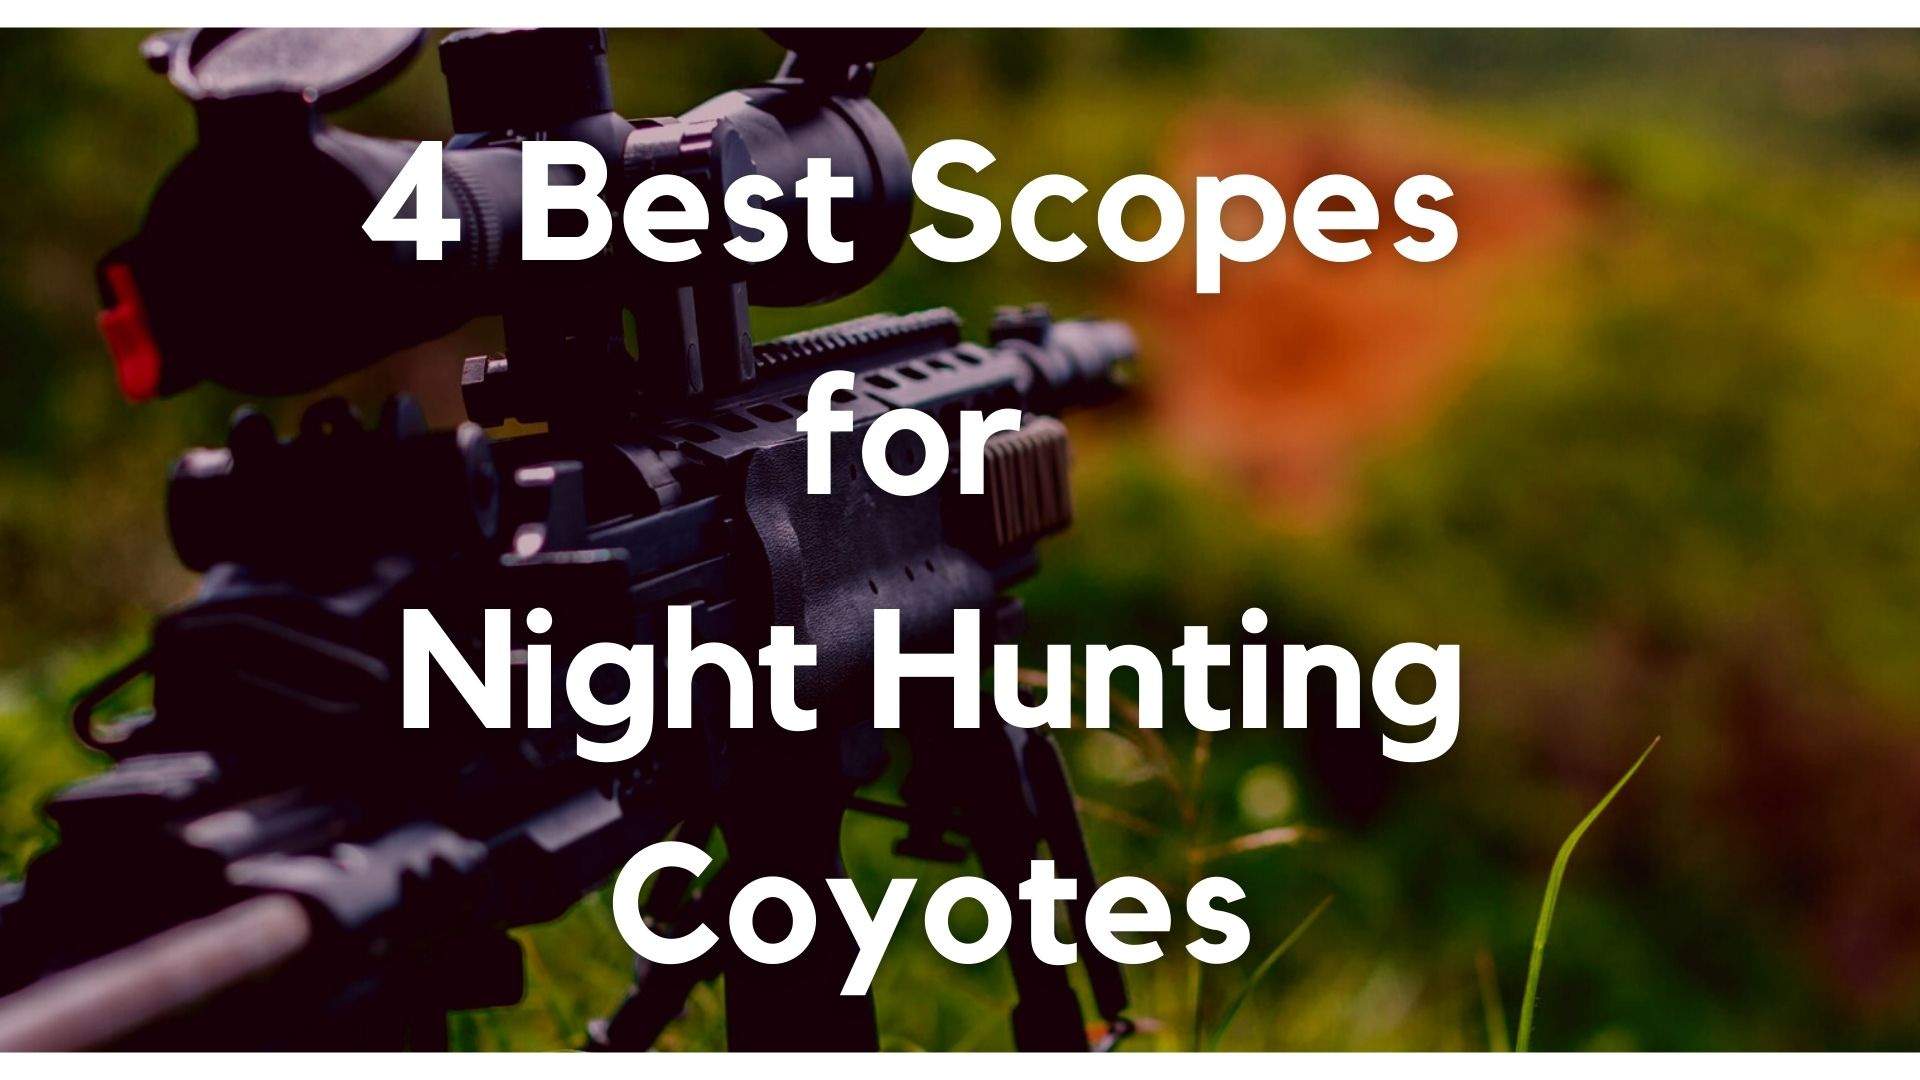 Best Scopes for Night Hunting Coyotes